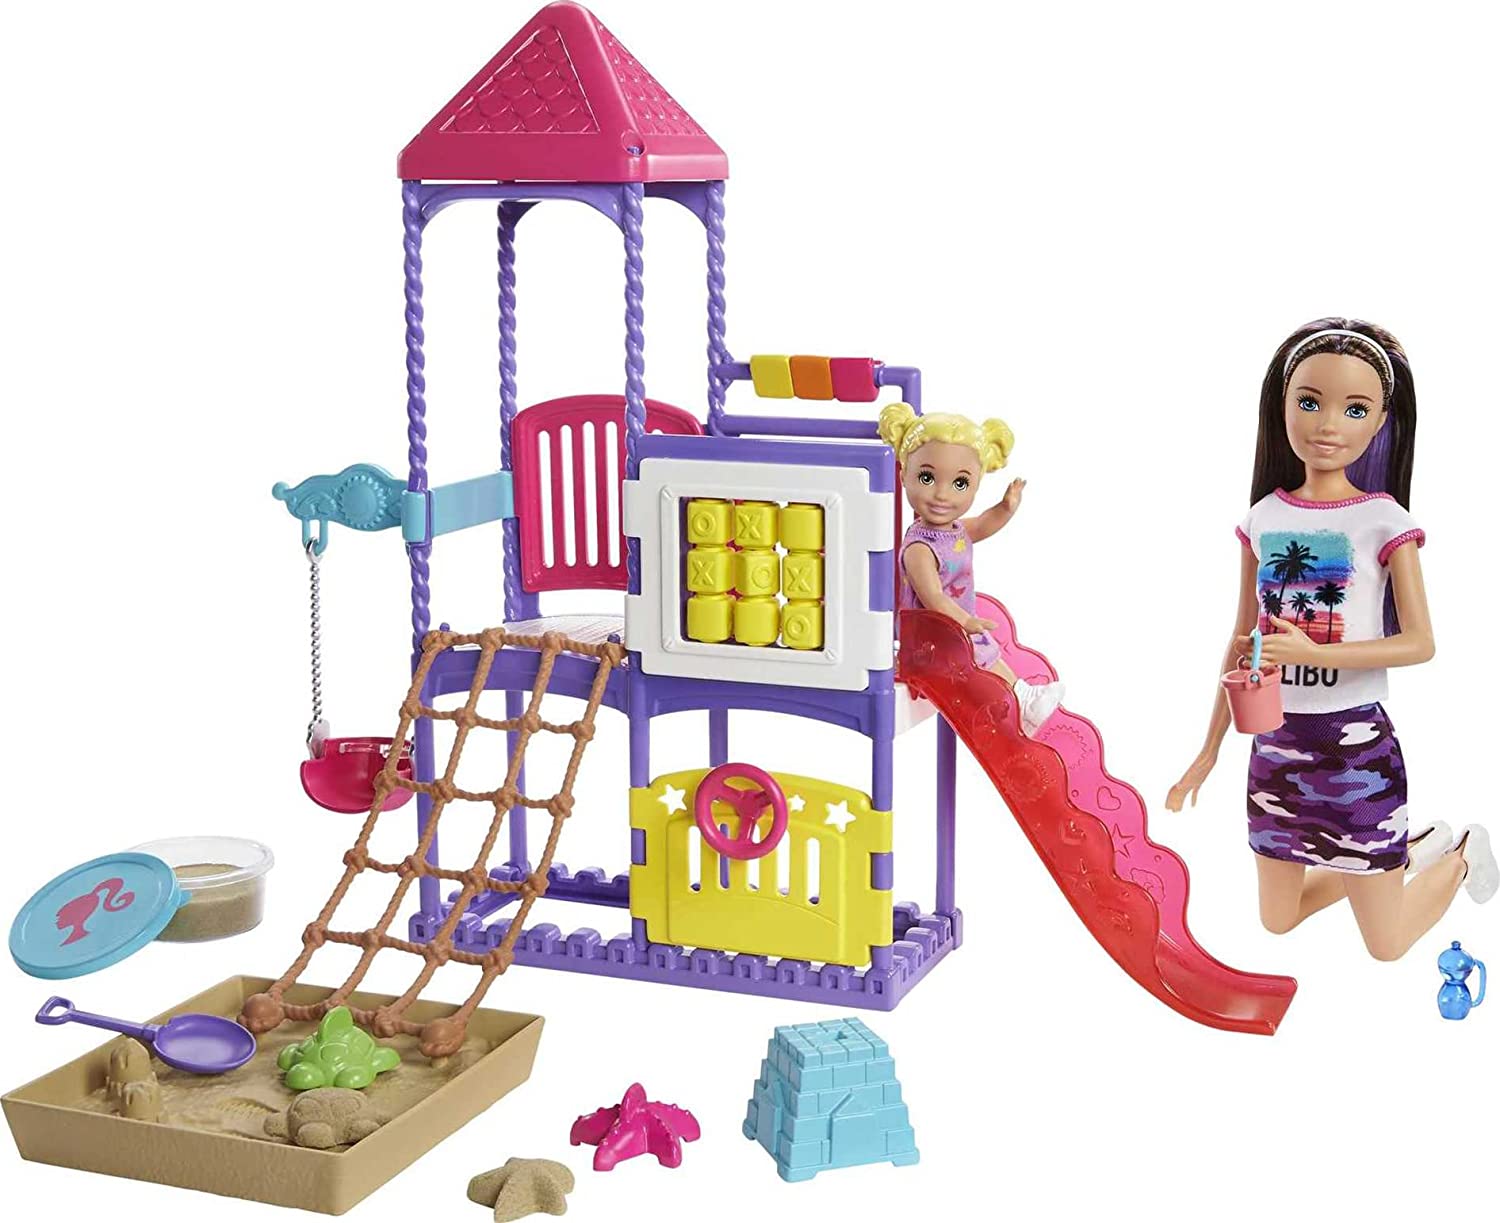 Barbie Skipper Babysitters Climb 'n Explore Playground Dolls & Playset $12.59 + Free Shipping w/ Prime or Orders $25+